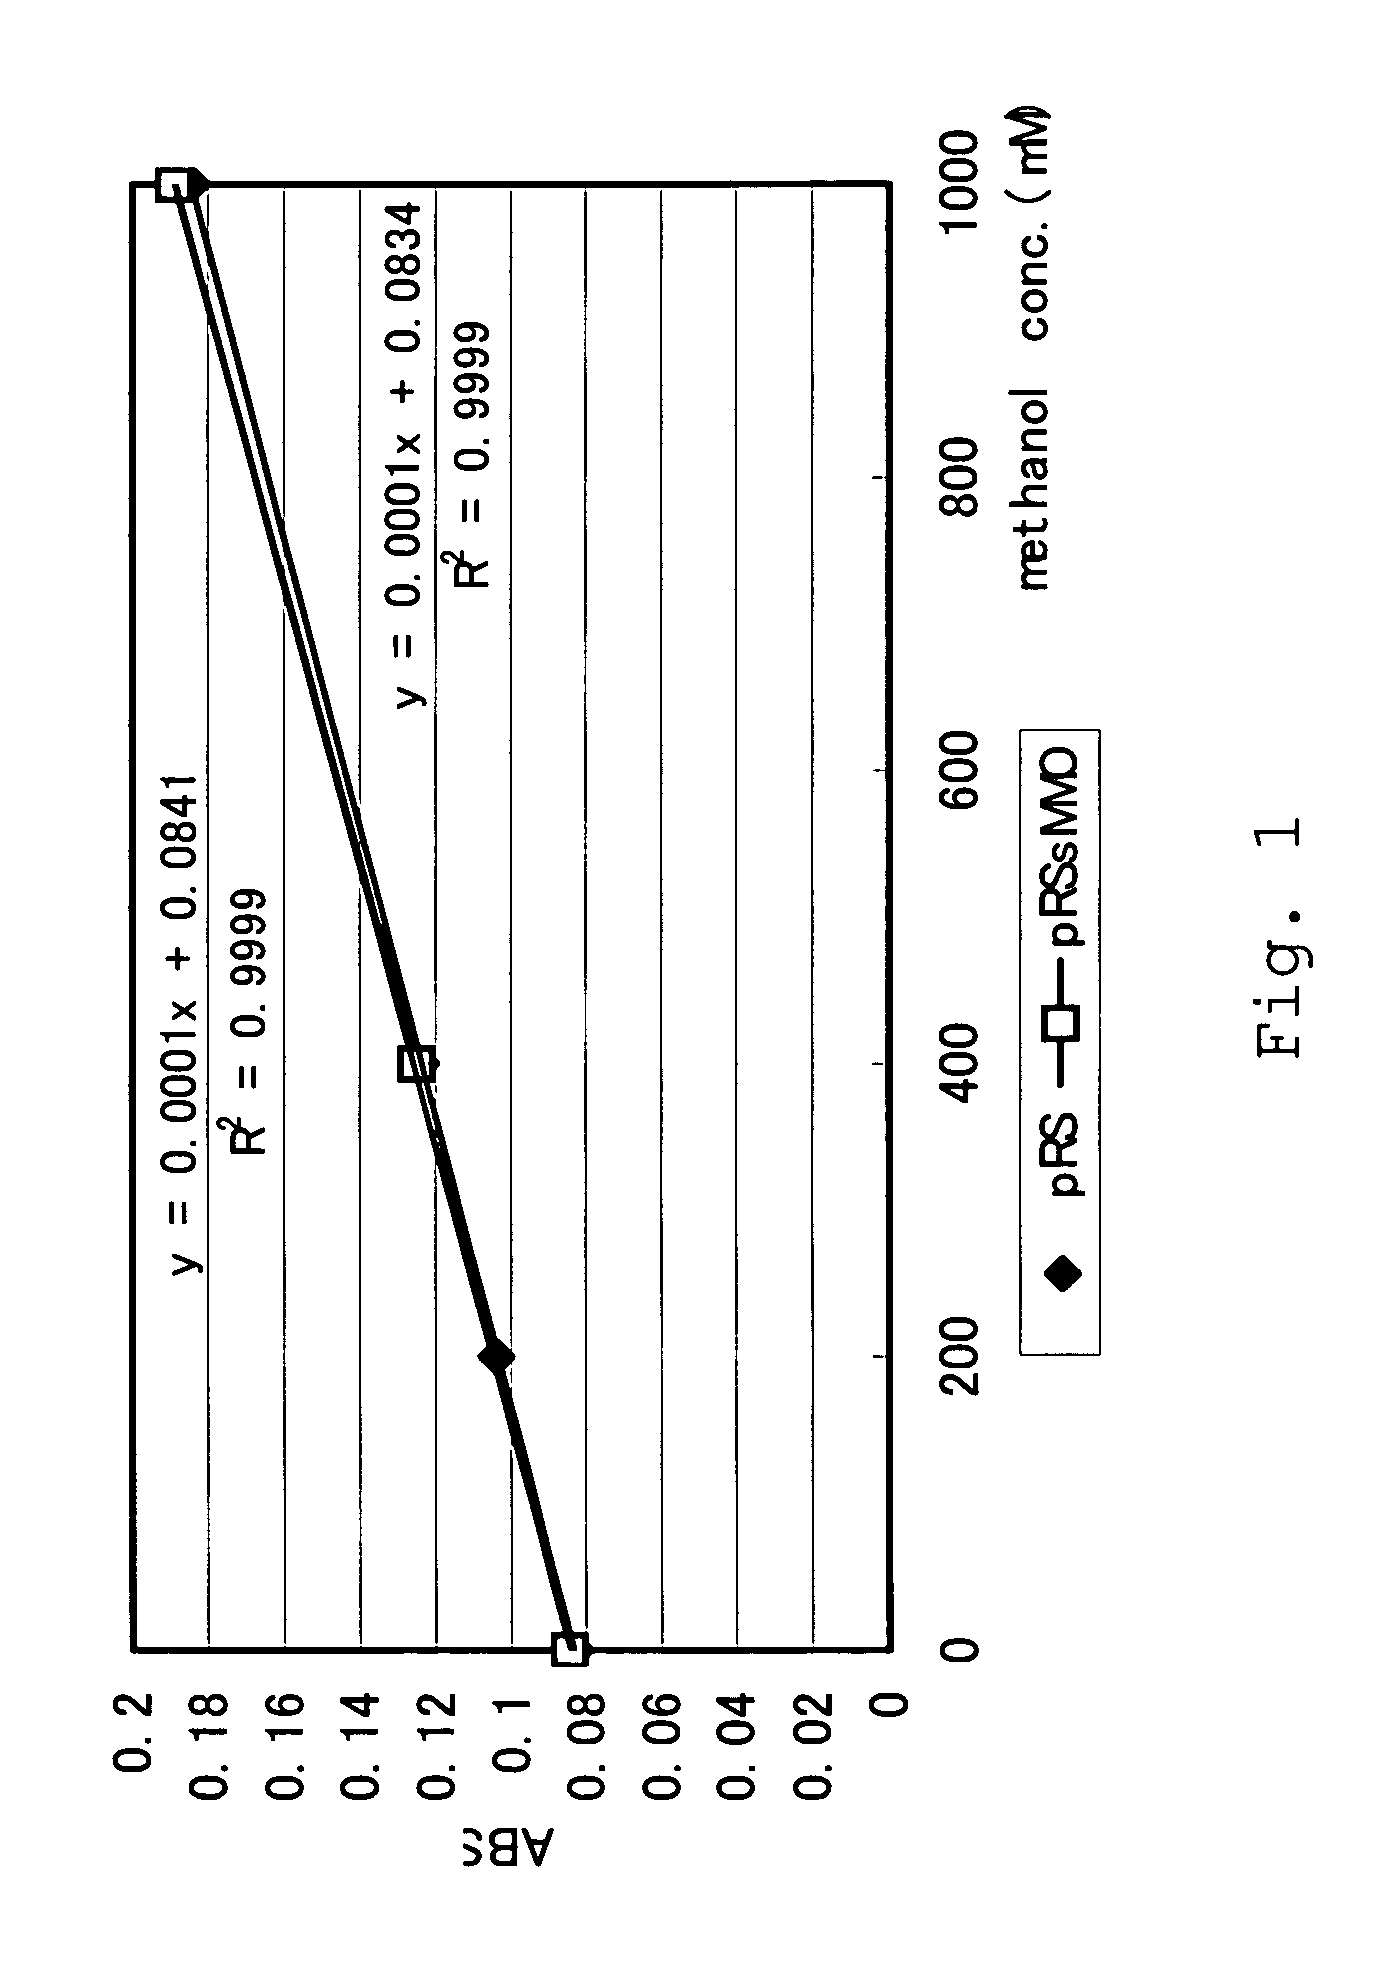 Method for producing alcohol by using microorganism